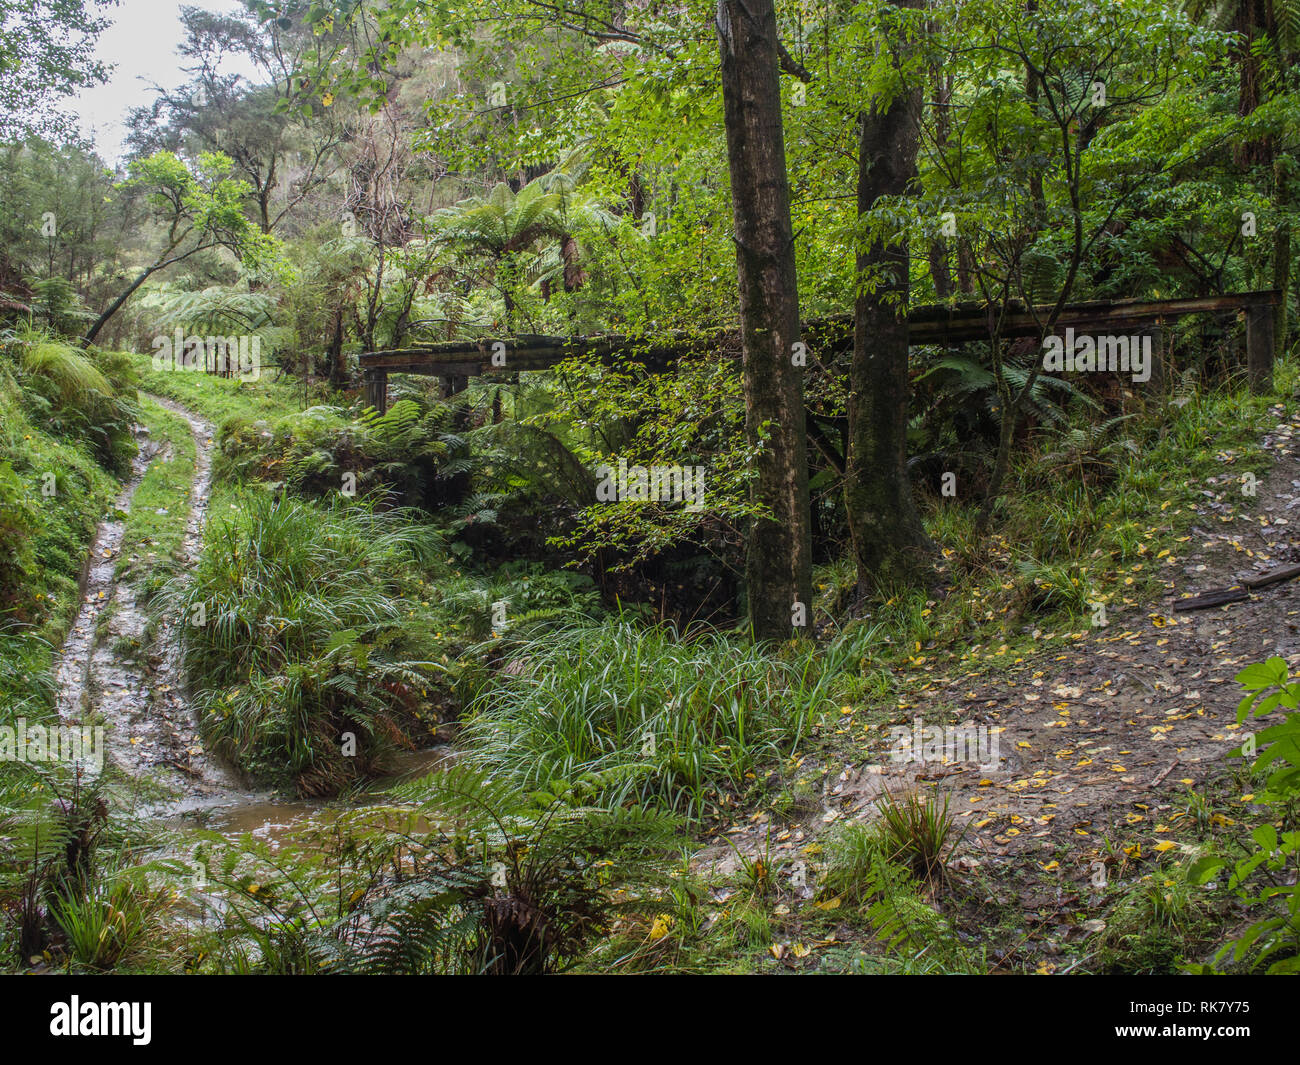 Broken bridge, dirt track trail diversion and ford across stream, regenerating forest on abandoned farm,  Ahuahu Valley, Whanganui River, New Zealand Stock Photo